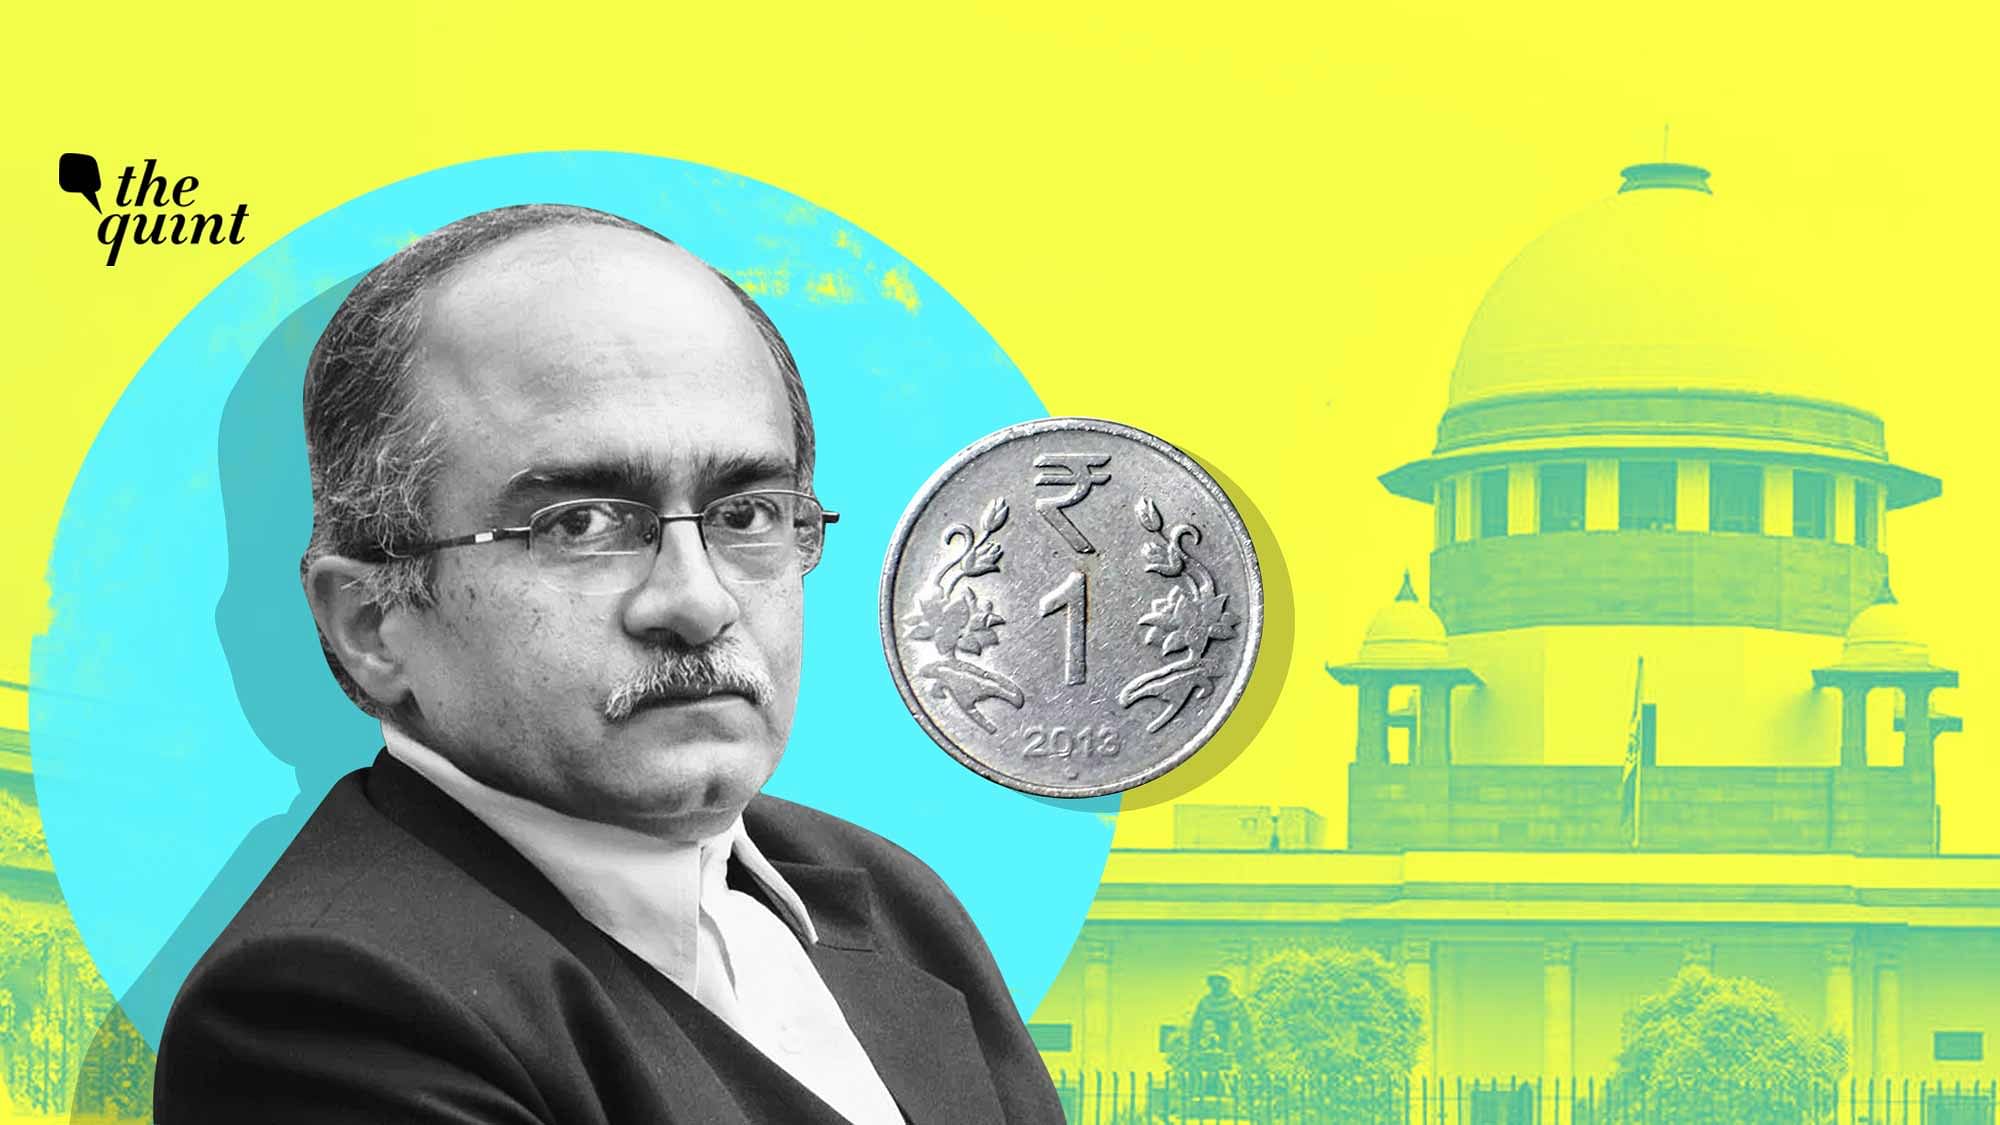 Advocate and activist Prashant Bhushan on Monday, 14 September, deposited in the Supreme Court Registry the draft of the one rupee fine that was imposed on him by the Supreme Court .